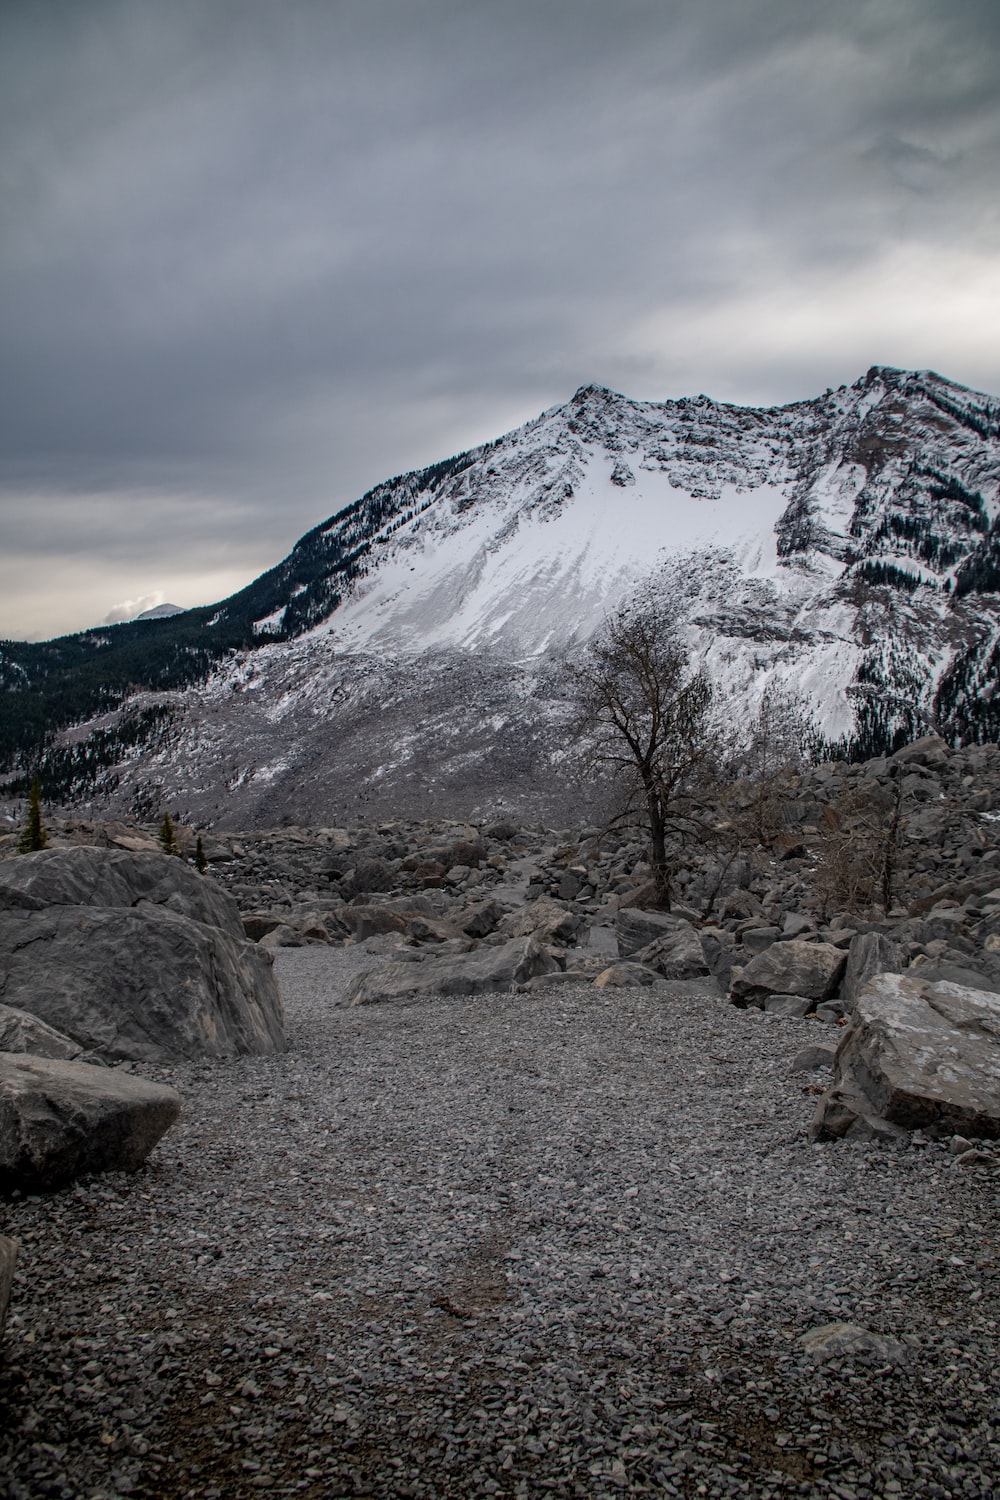 a mountain covered in snow and rocks under a cloudy sky